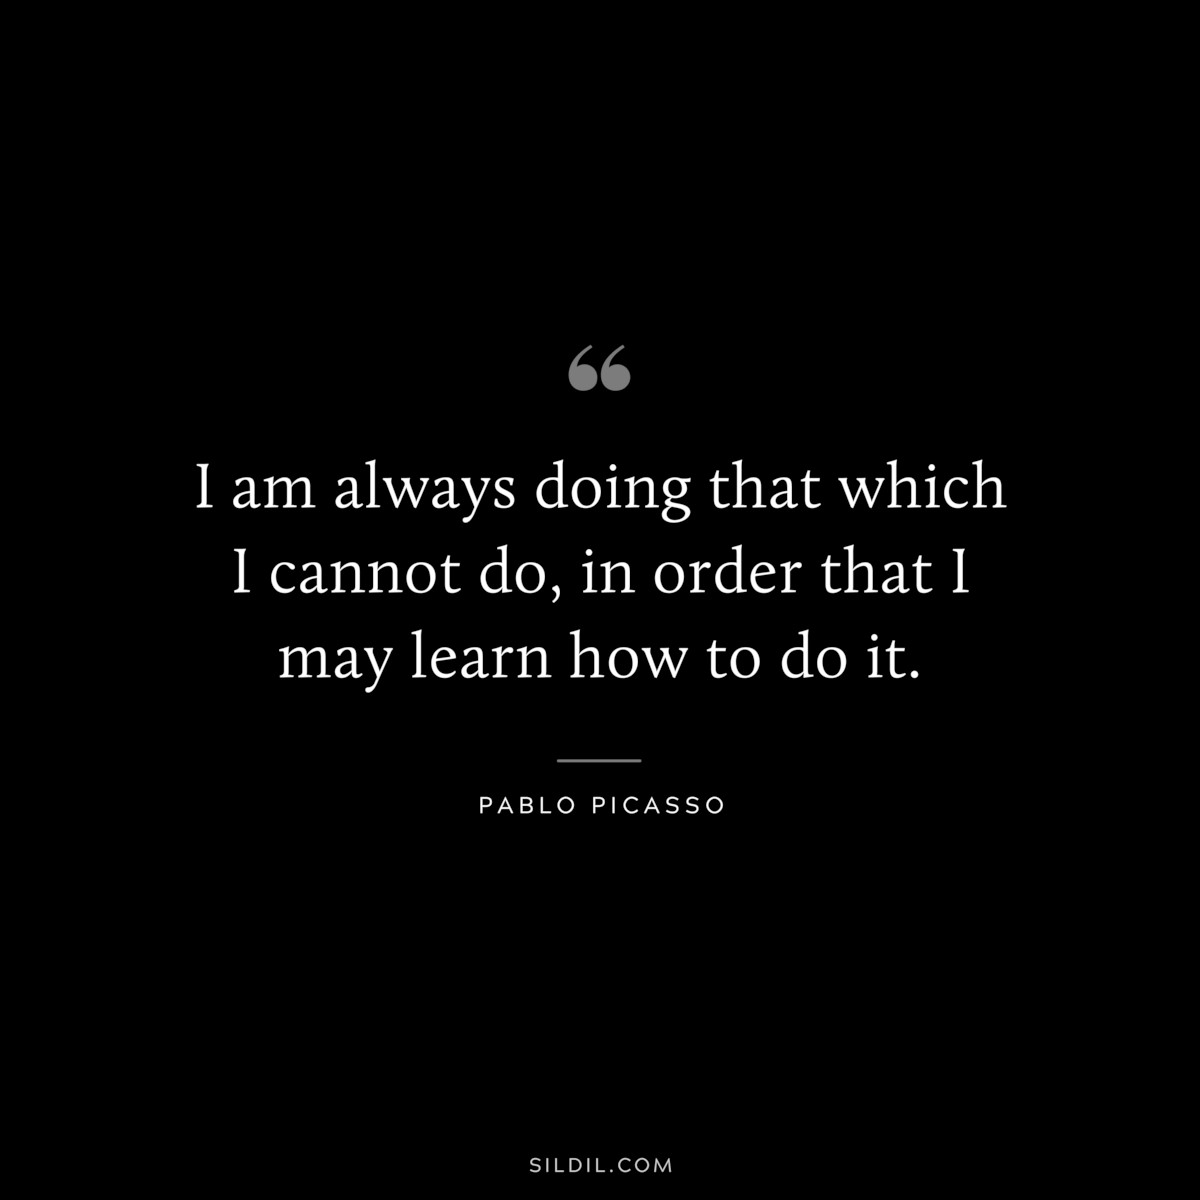 I am always doing that which I cannot do, in order that I may learn how to do it. ― Pablo Picasso